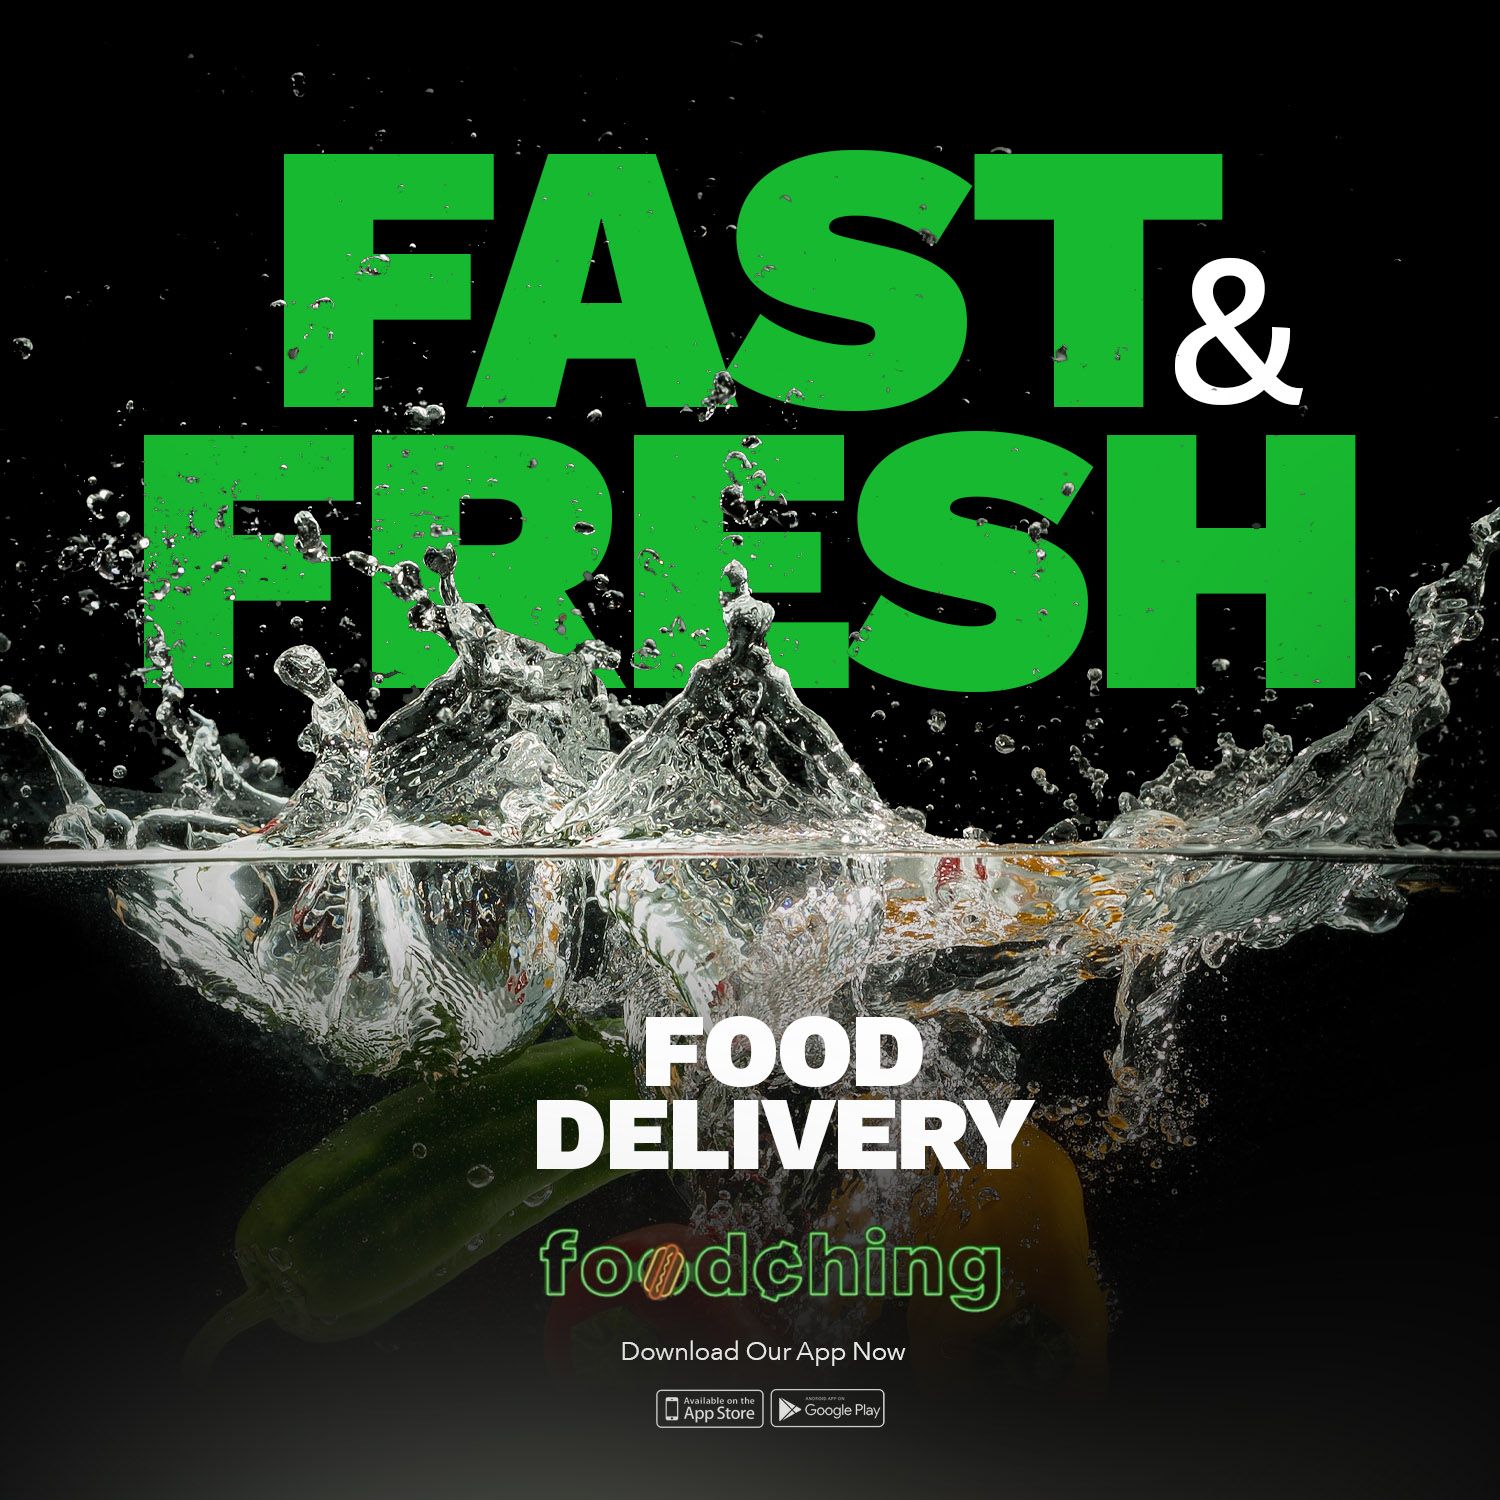 National Free Food Delivery Service FoodChing Signs 100 Restaurants in Louisville